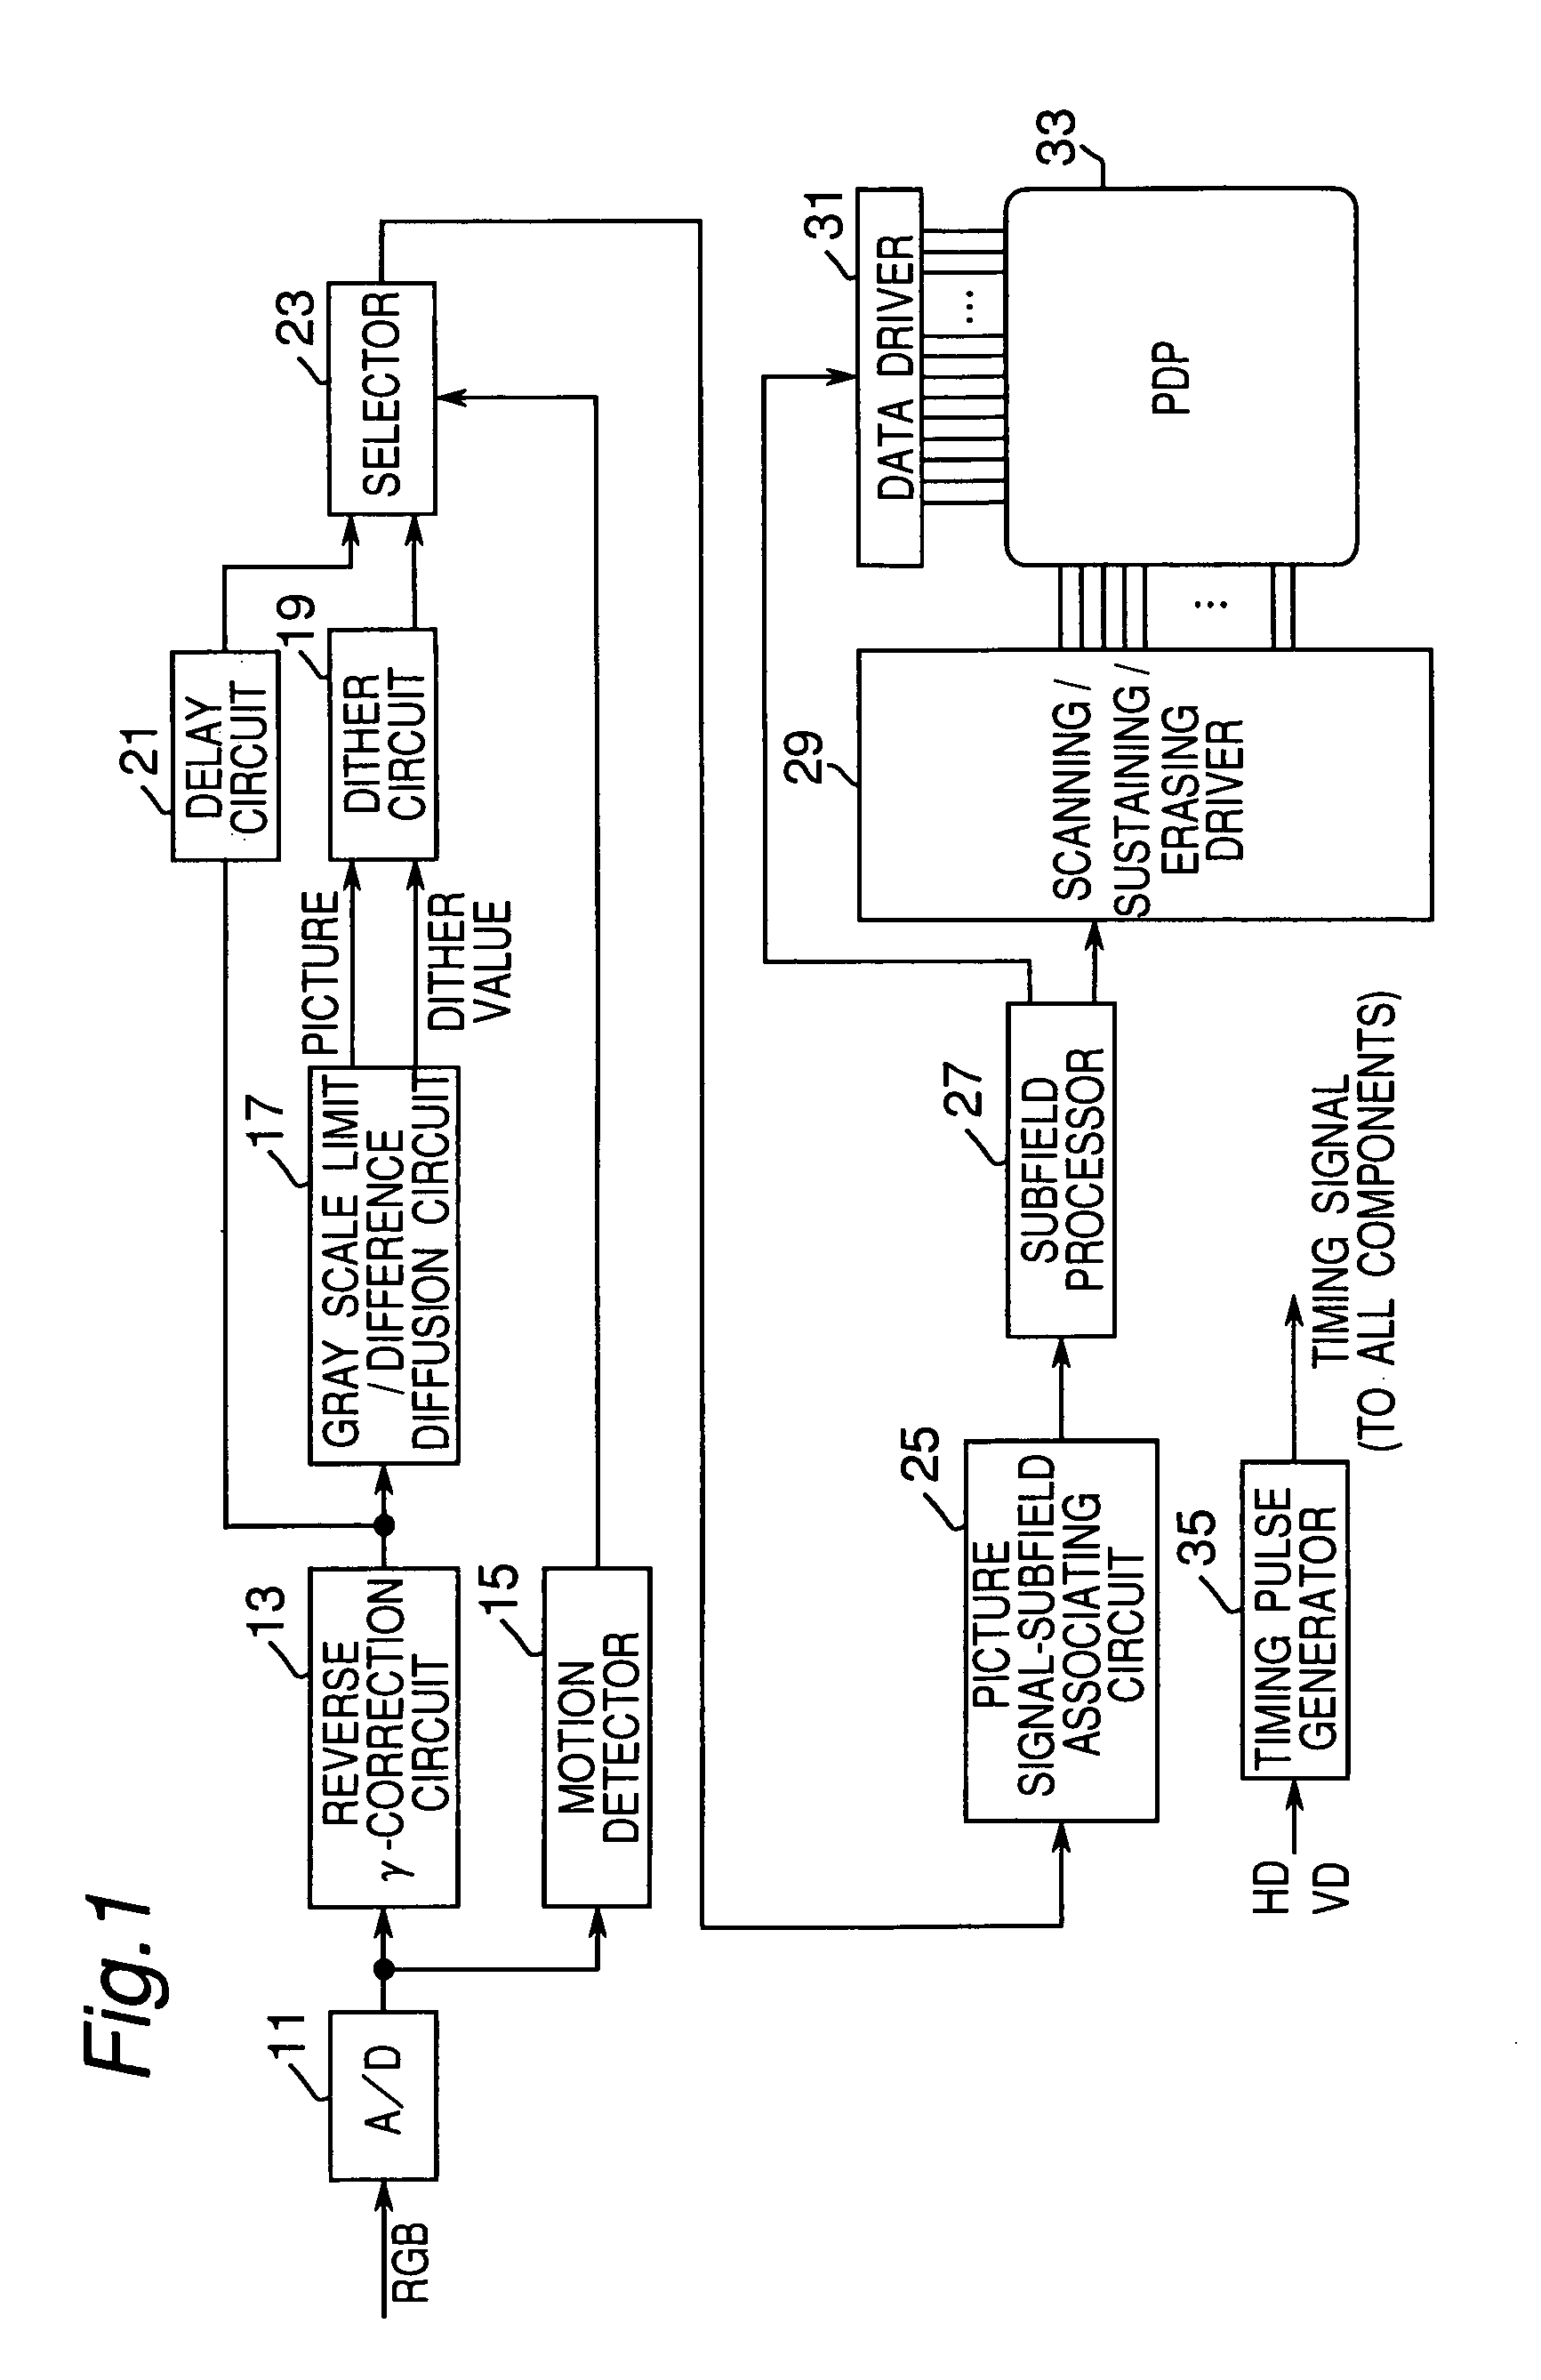 Apparatus and method for making a gray scale display with subframes